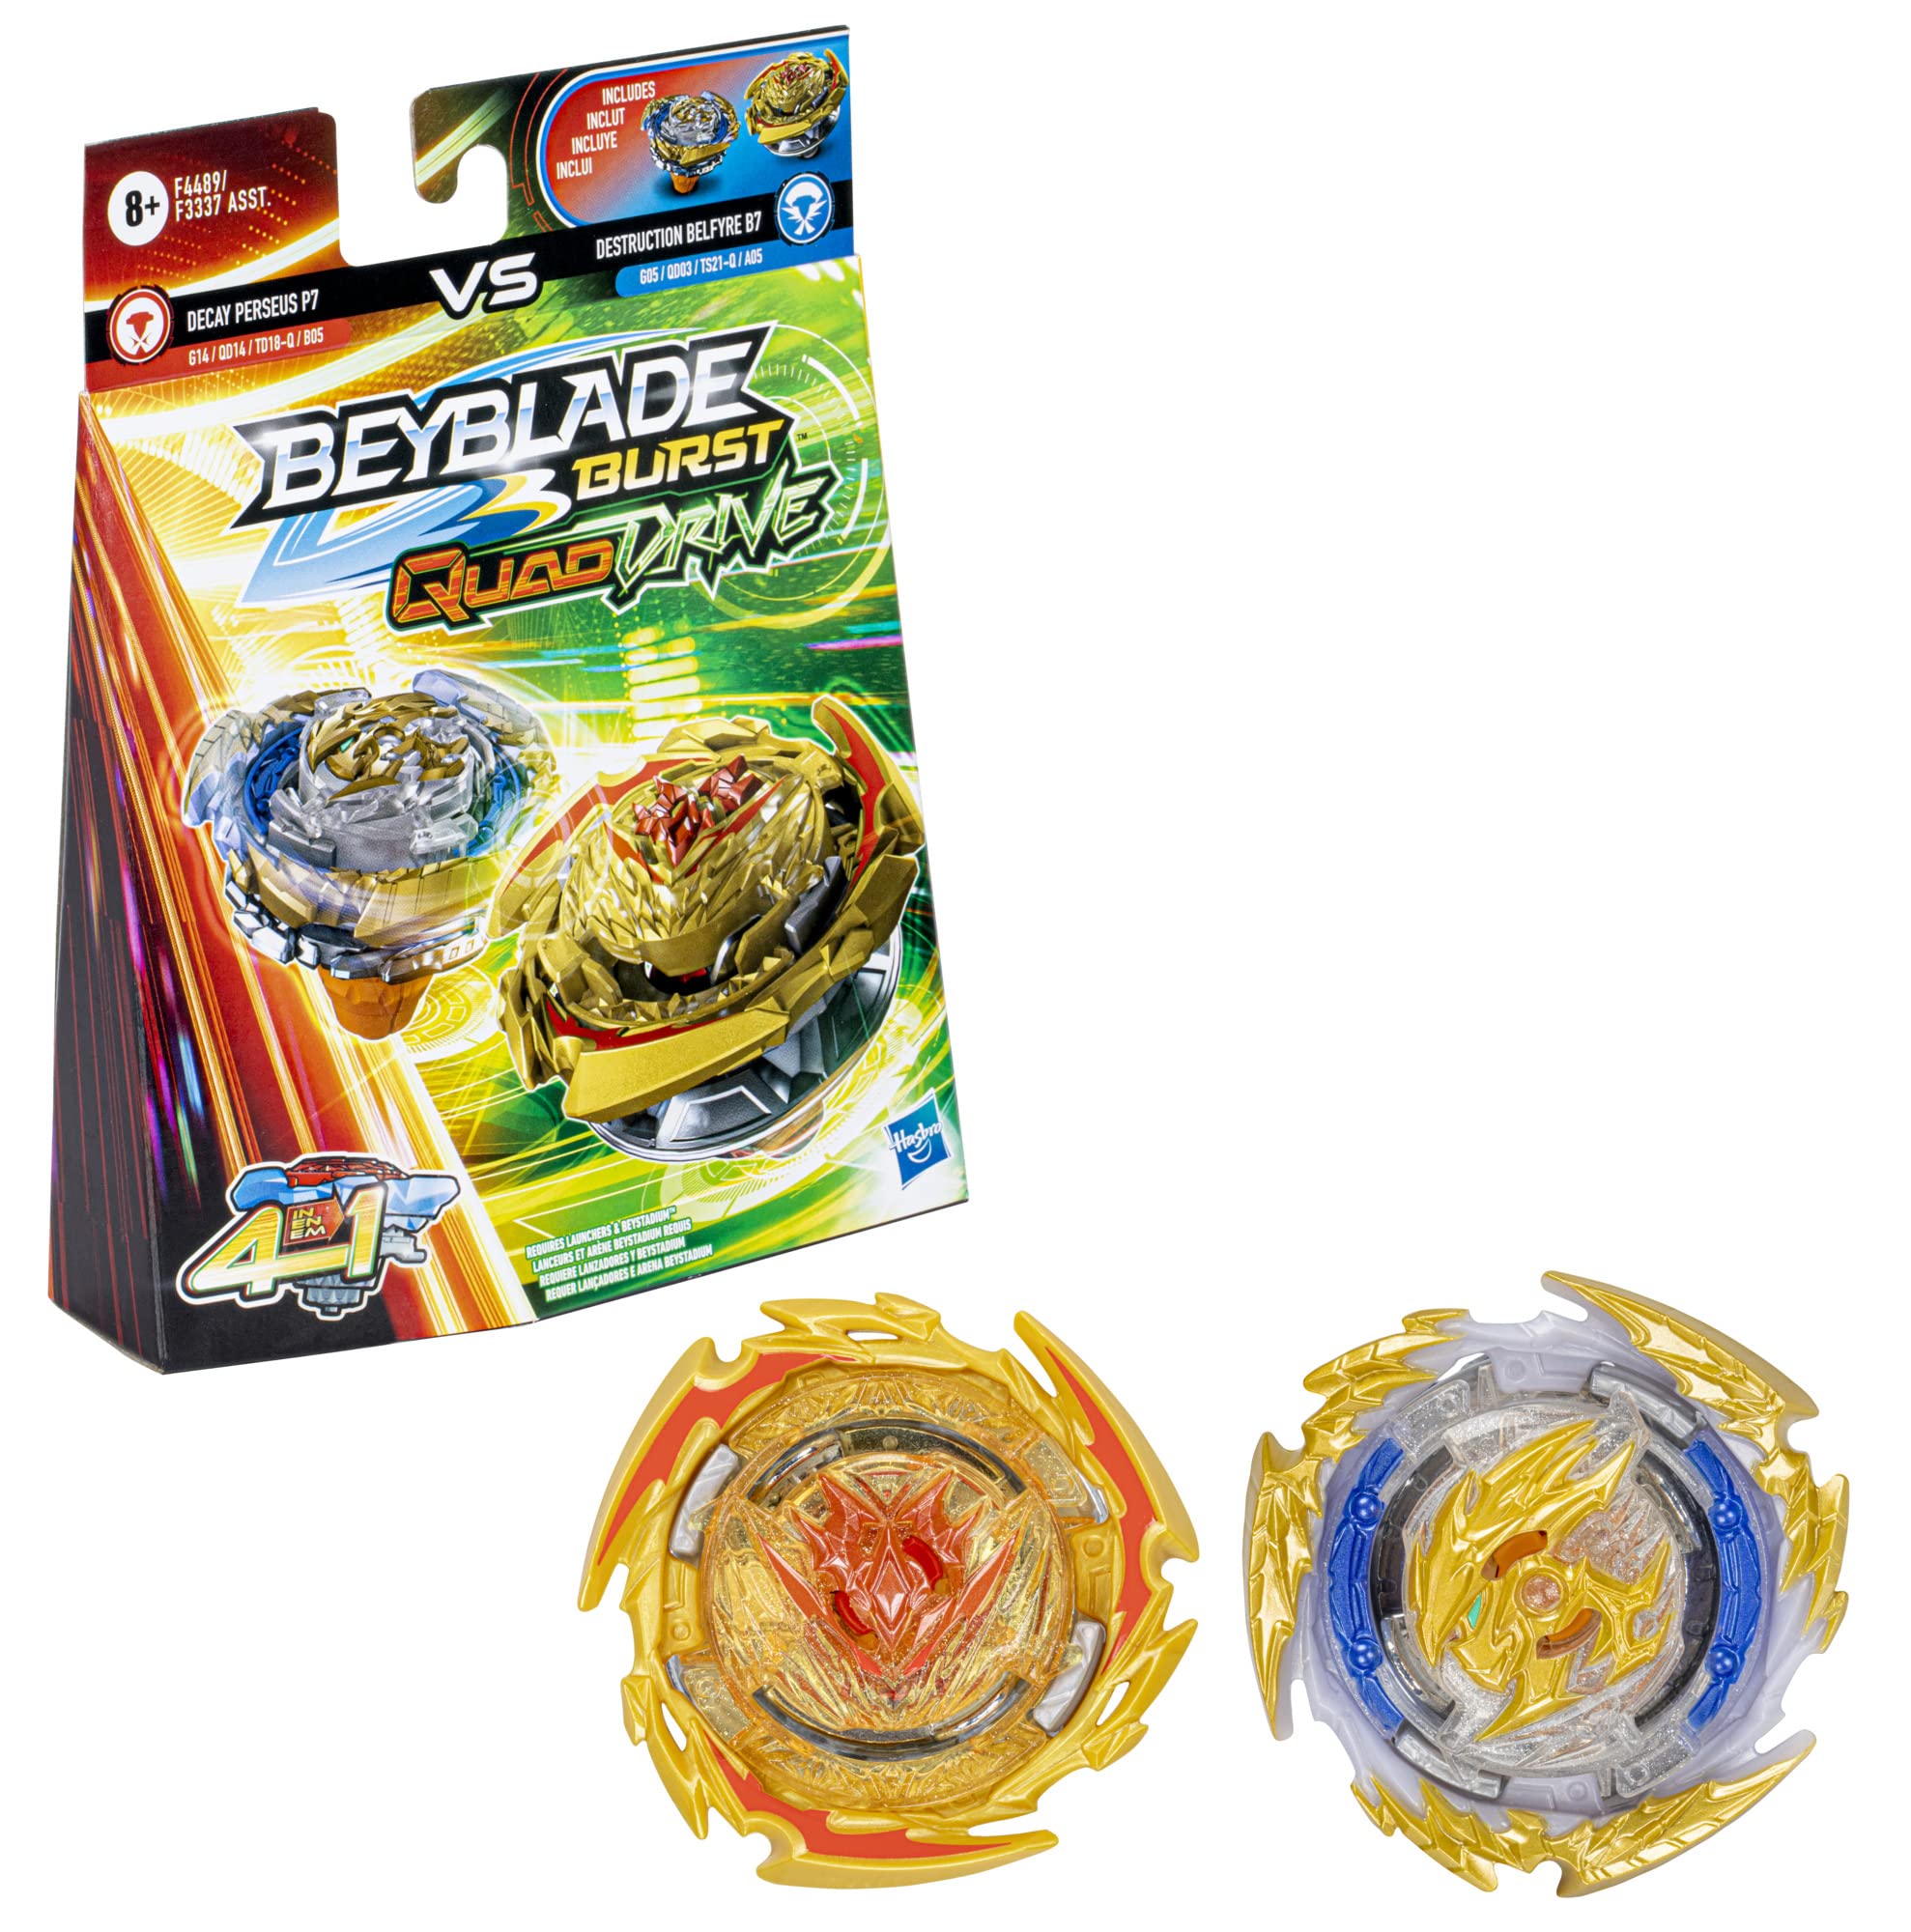 BEYBLADE Burst QuadDrive Destruction Belfyre B7 and Decay Perseus P7 Spinning Top Dual Pack - 2 Battling Game Top Toy for Kids Ages 8 and Up